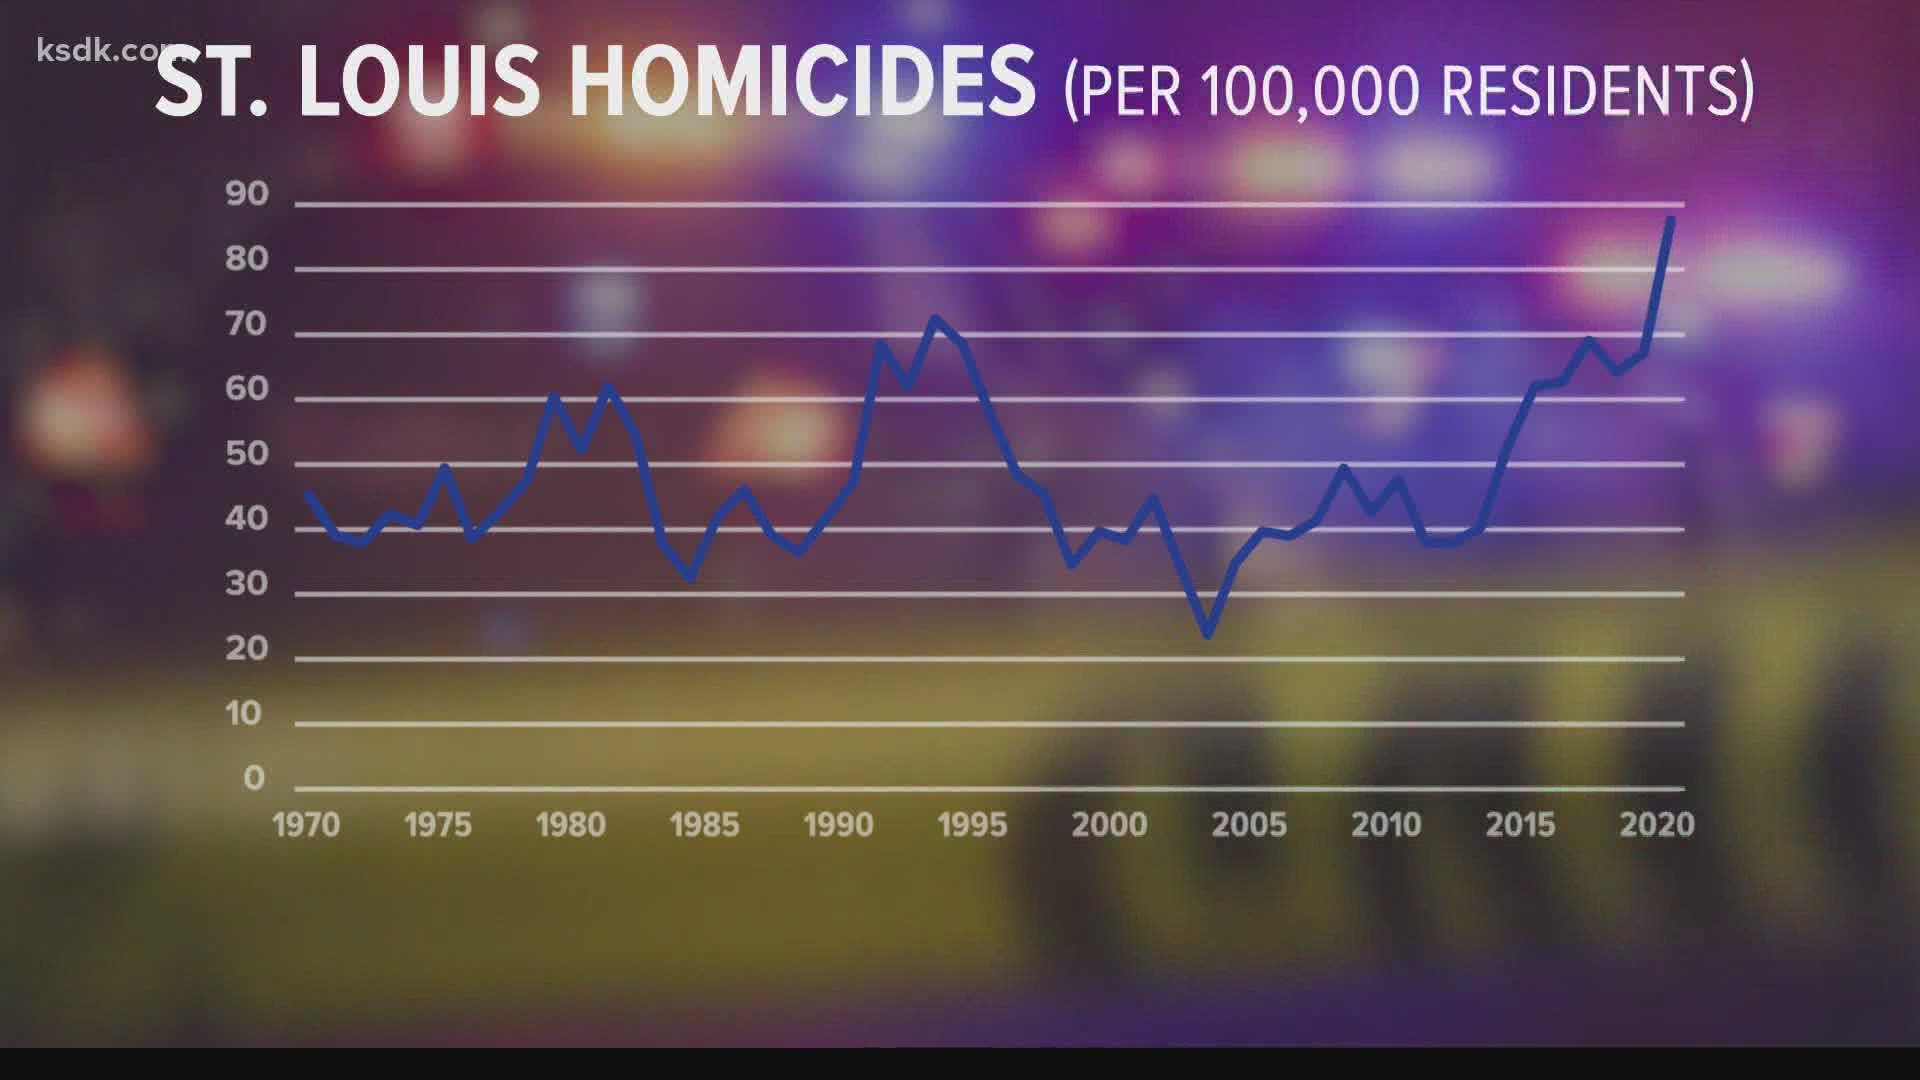 Per capita, the homicide rate in St. Louis in 2020 was the highest the city has ever recorded.